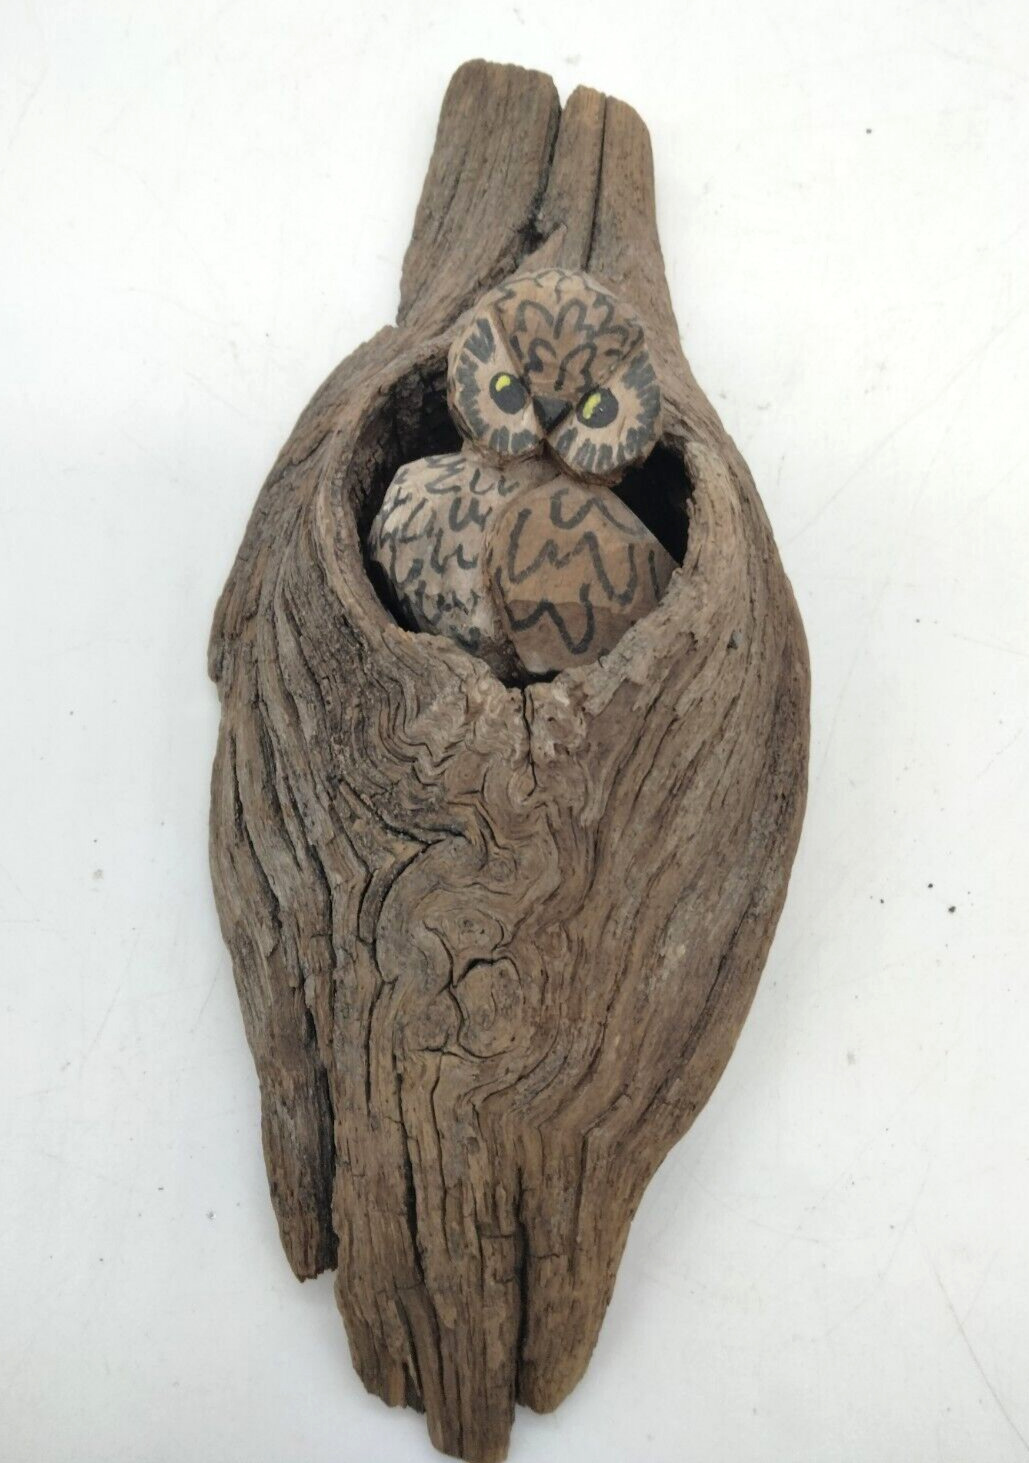 Hand Carved Folk Art Wooden Owl Sitting in Tree Knot Wall Hanging Signed R.W.